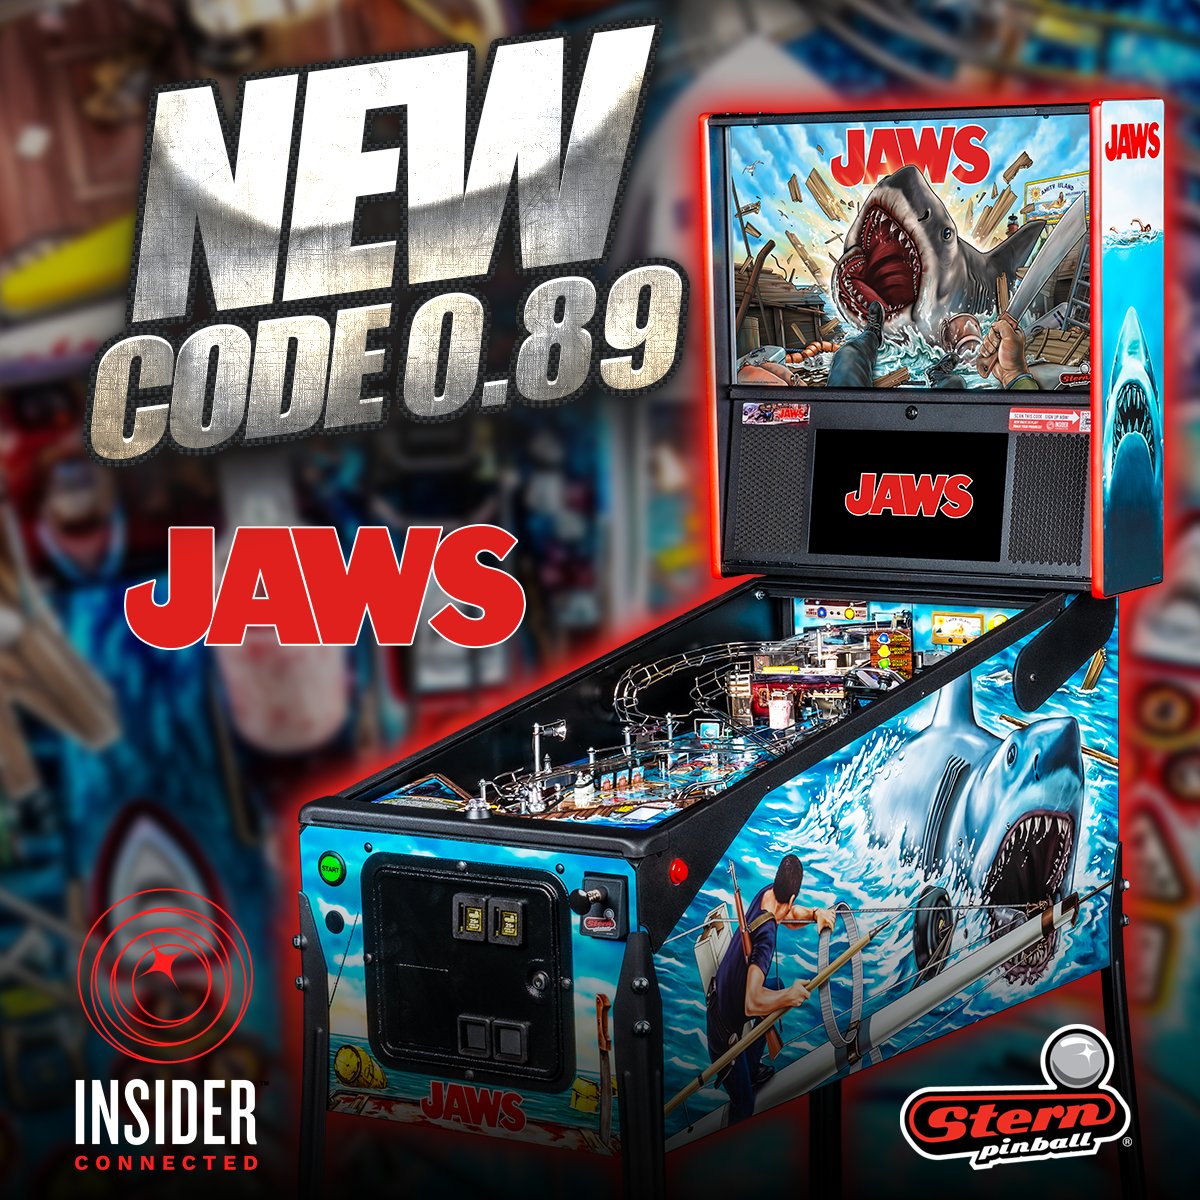 NEW CODE! Stern Pinball has posted new JAWS code v0.89.0 for the Pro, Premium, and Limited Edition models. This code contains minor updates and bug fixes.